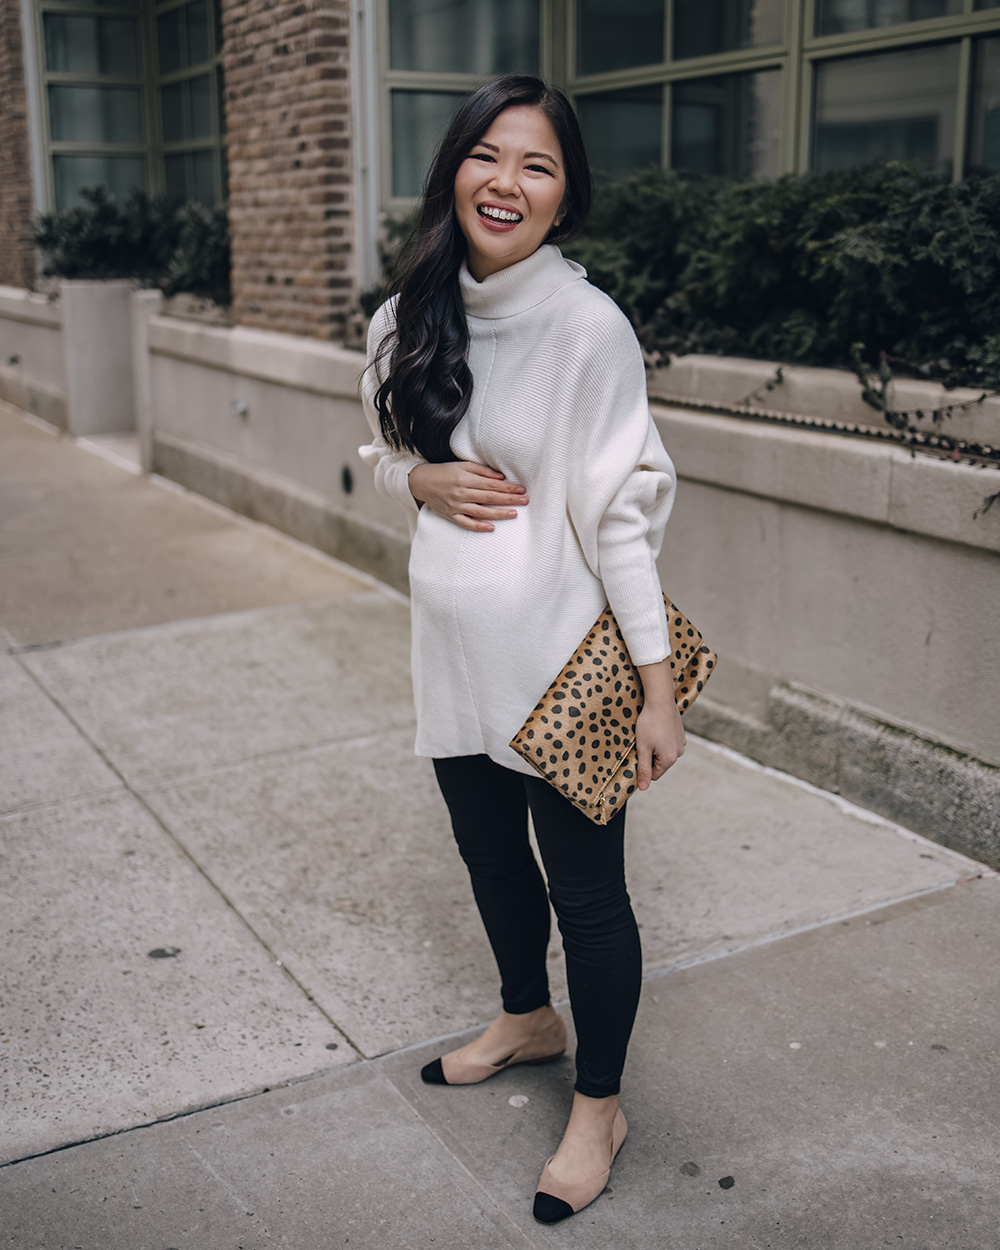 9 Maternity Outfit Ideas for Work – Skirt The Rules